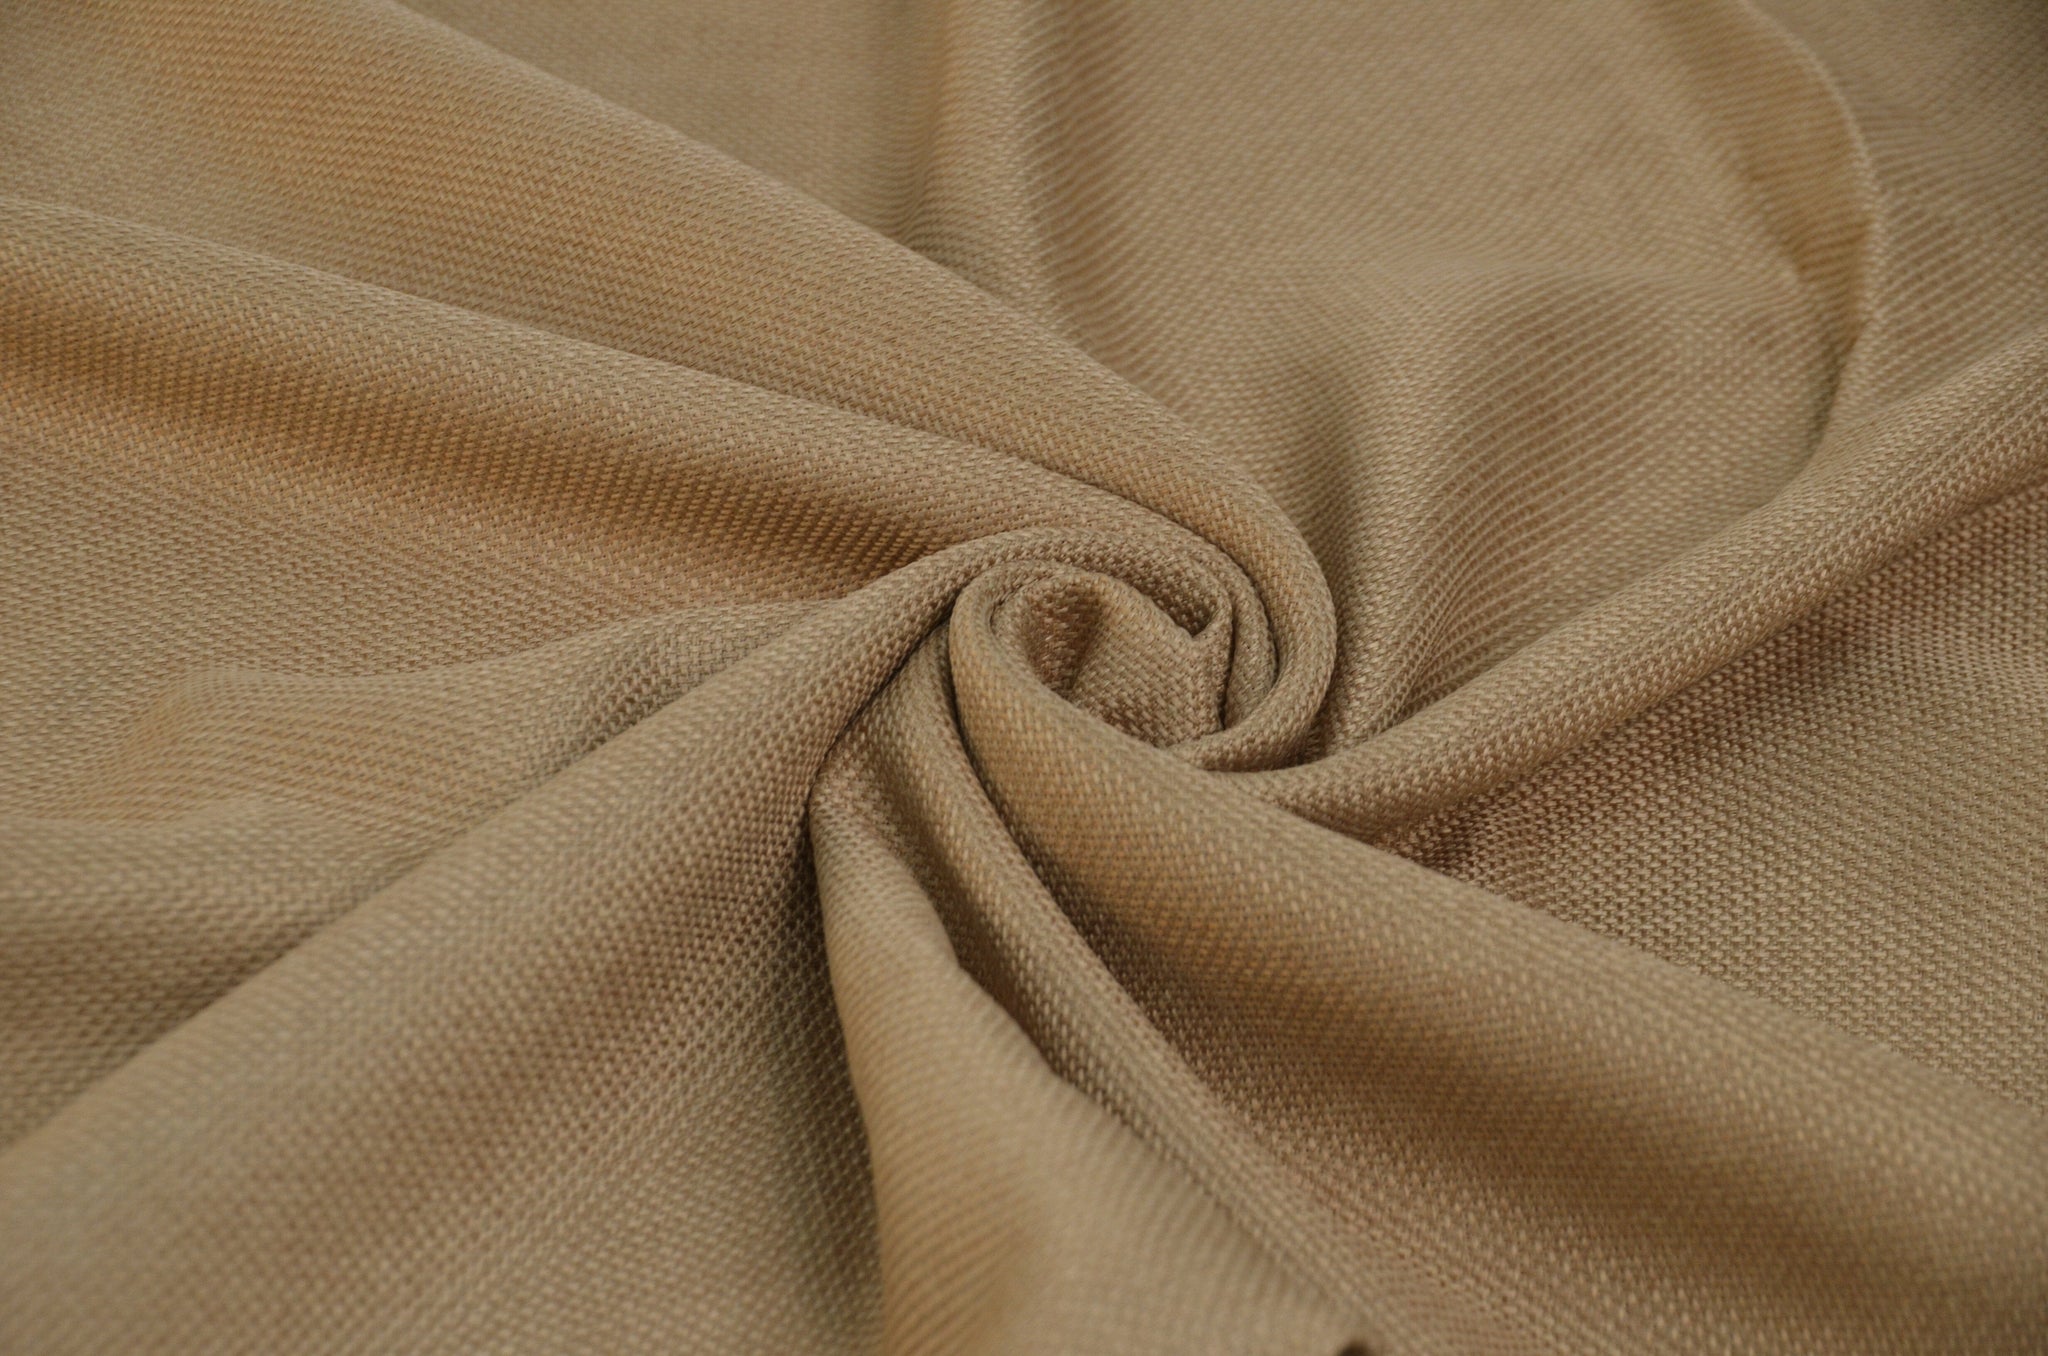 Burlap (60 Wide) Fabric - Natural Many Colors Available